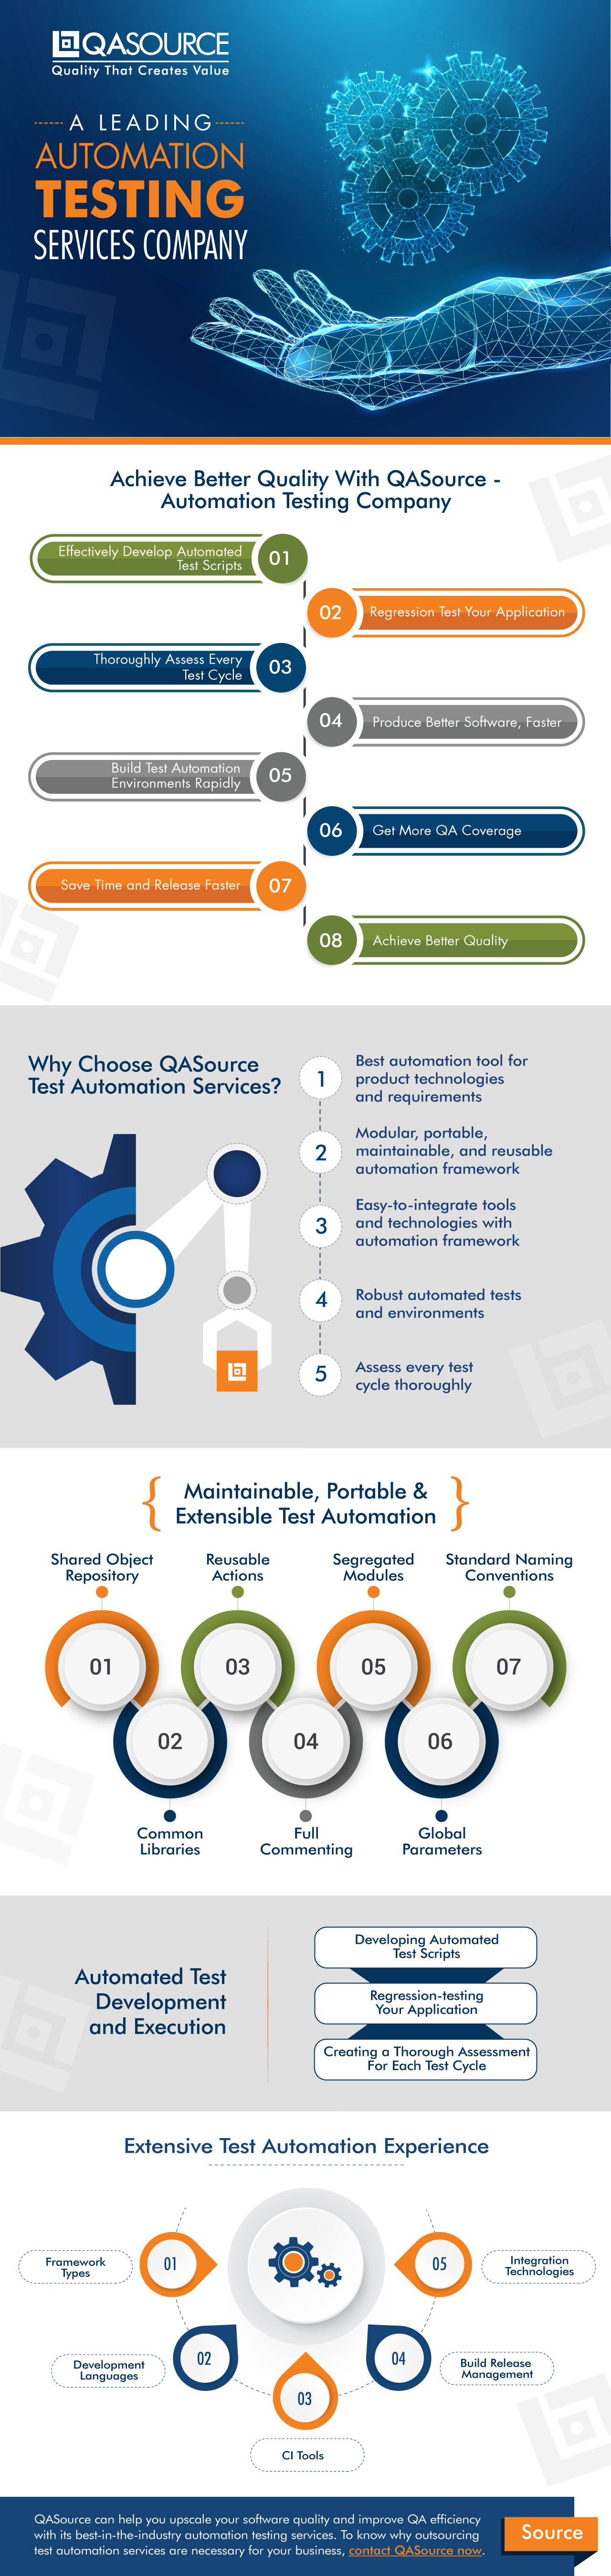 A Leading Automation Testing Services Company